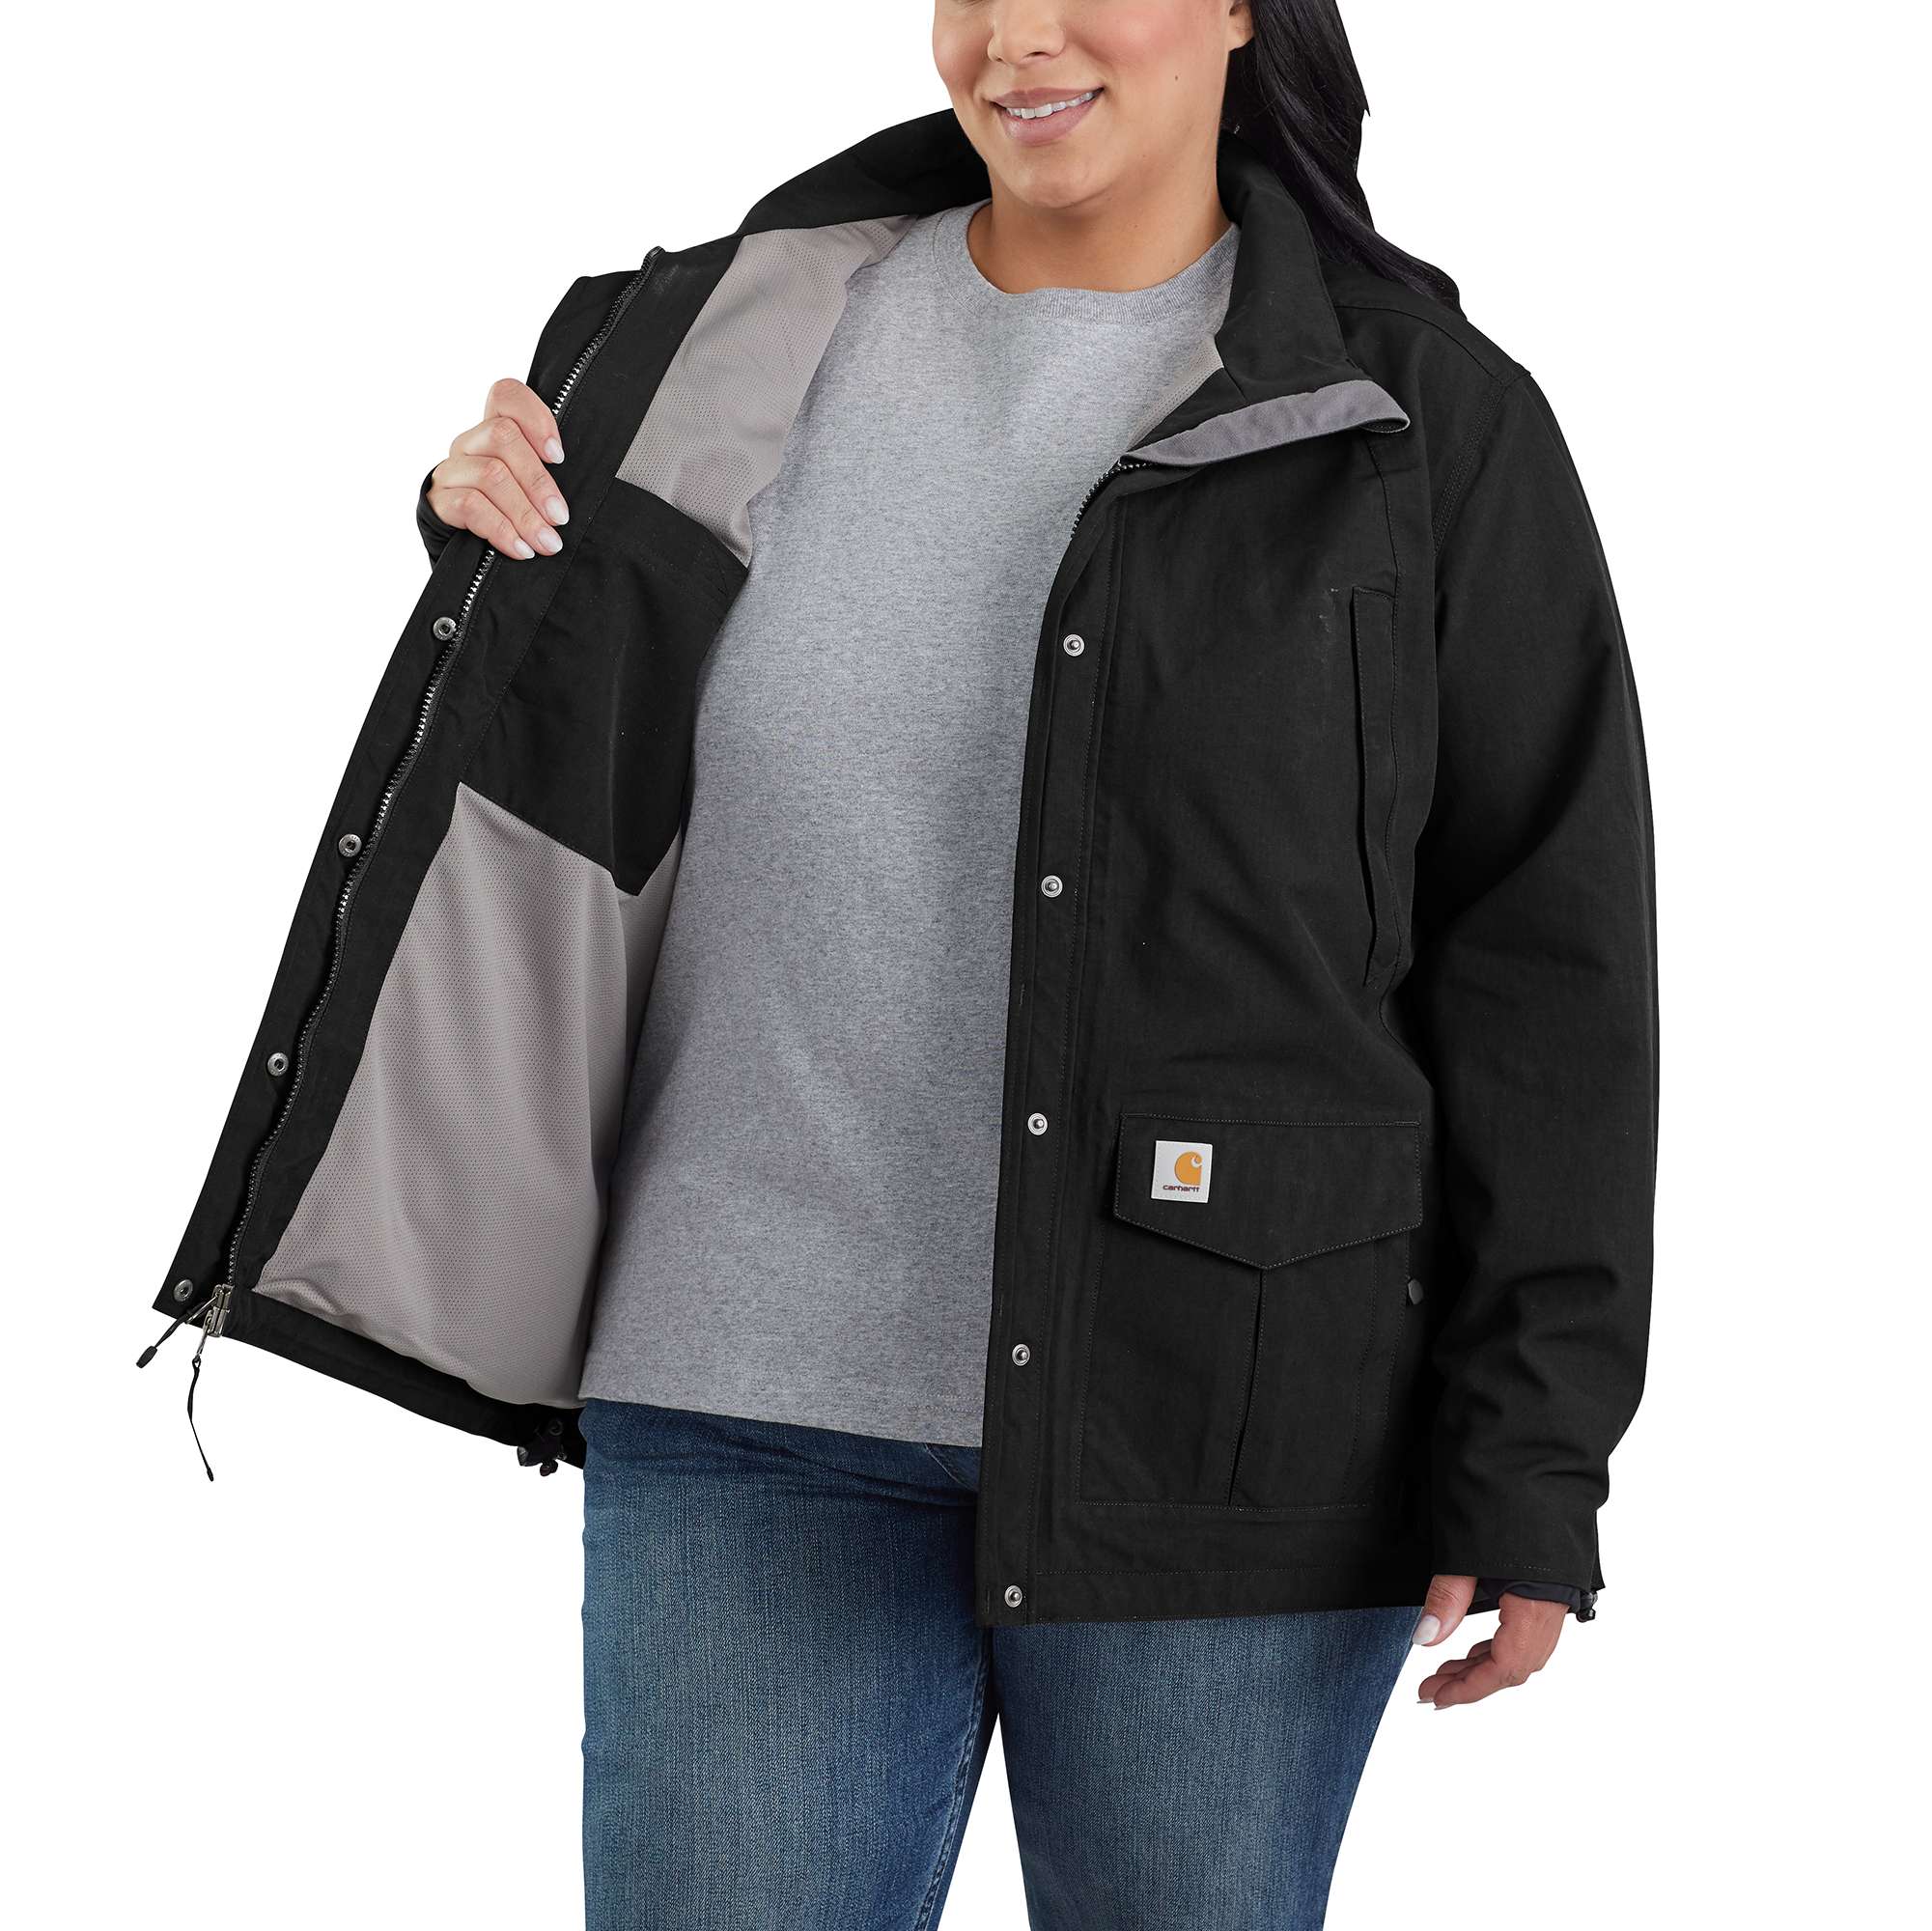 Women's Storm Defender® Jacket - Relaxed Fit Heavyweight 1 Warm Rating